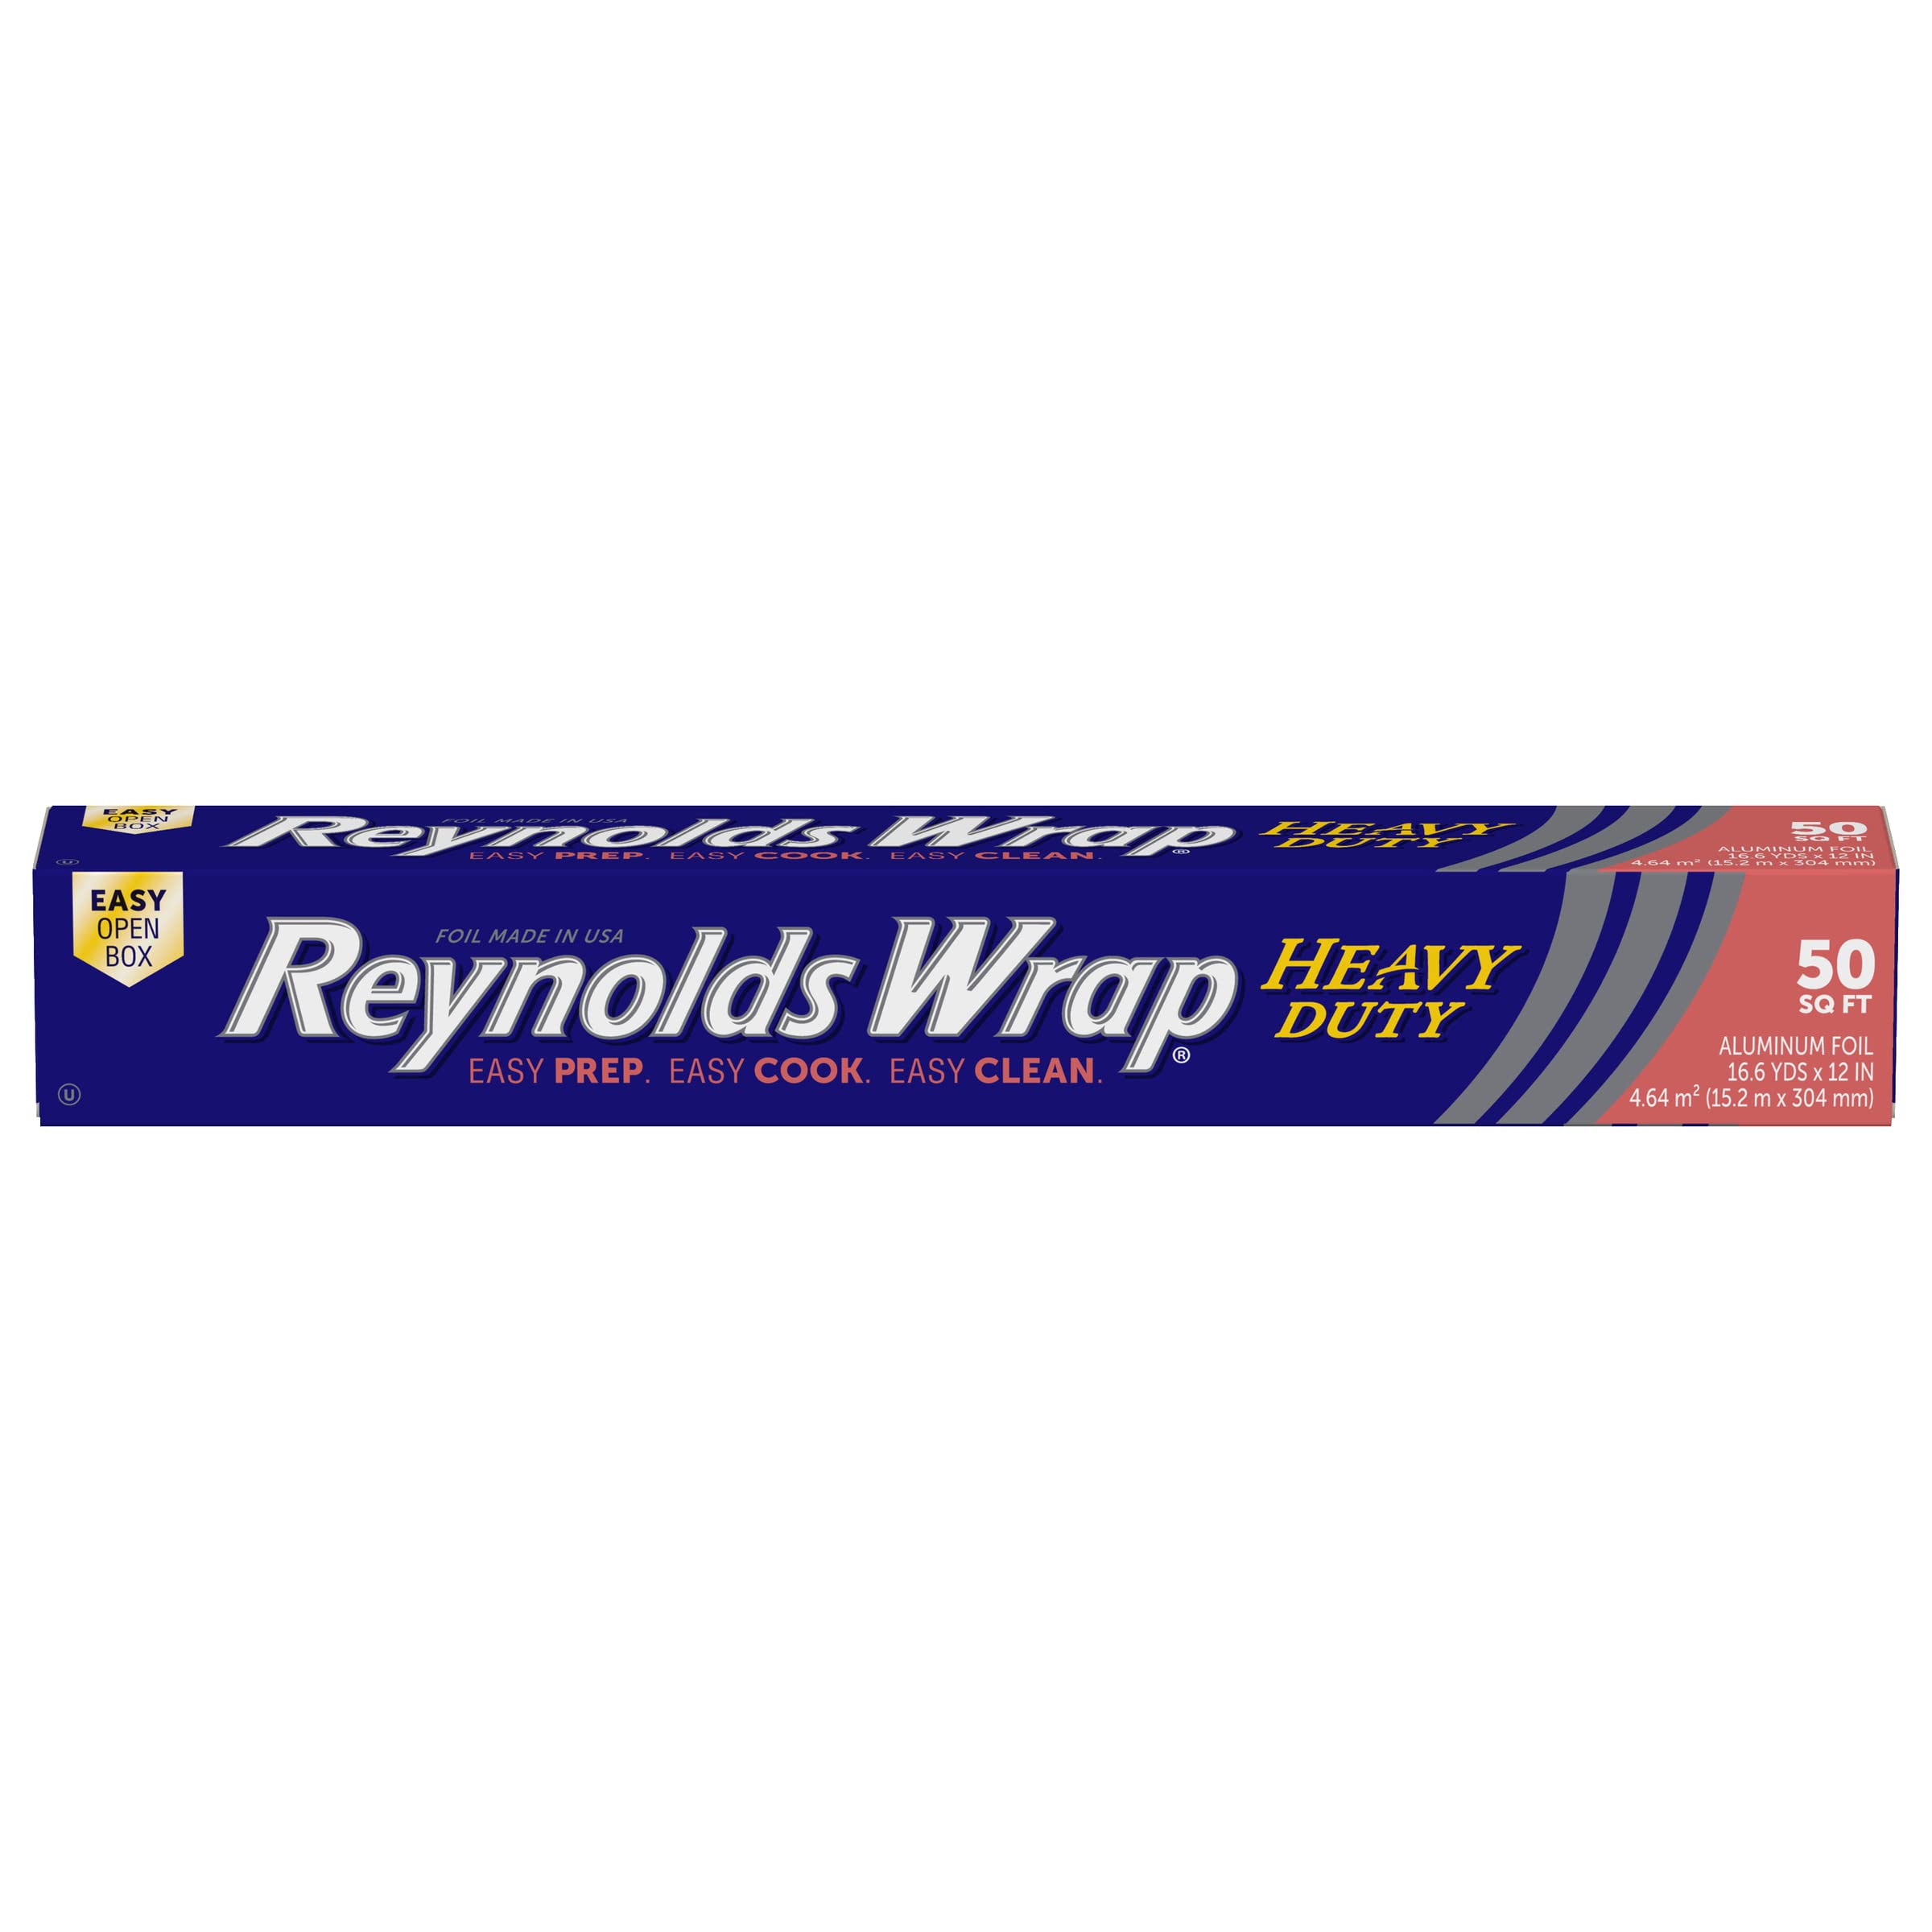 50 Sq. Ft. Reynolds Wrap Heavy Duty Aluminum Foil $3.80 w/ S&S + Free Shipping w/ Prime or on $35+